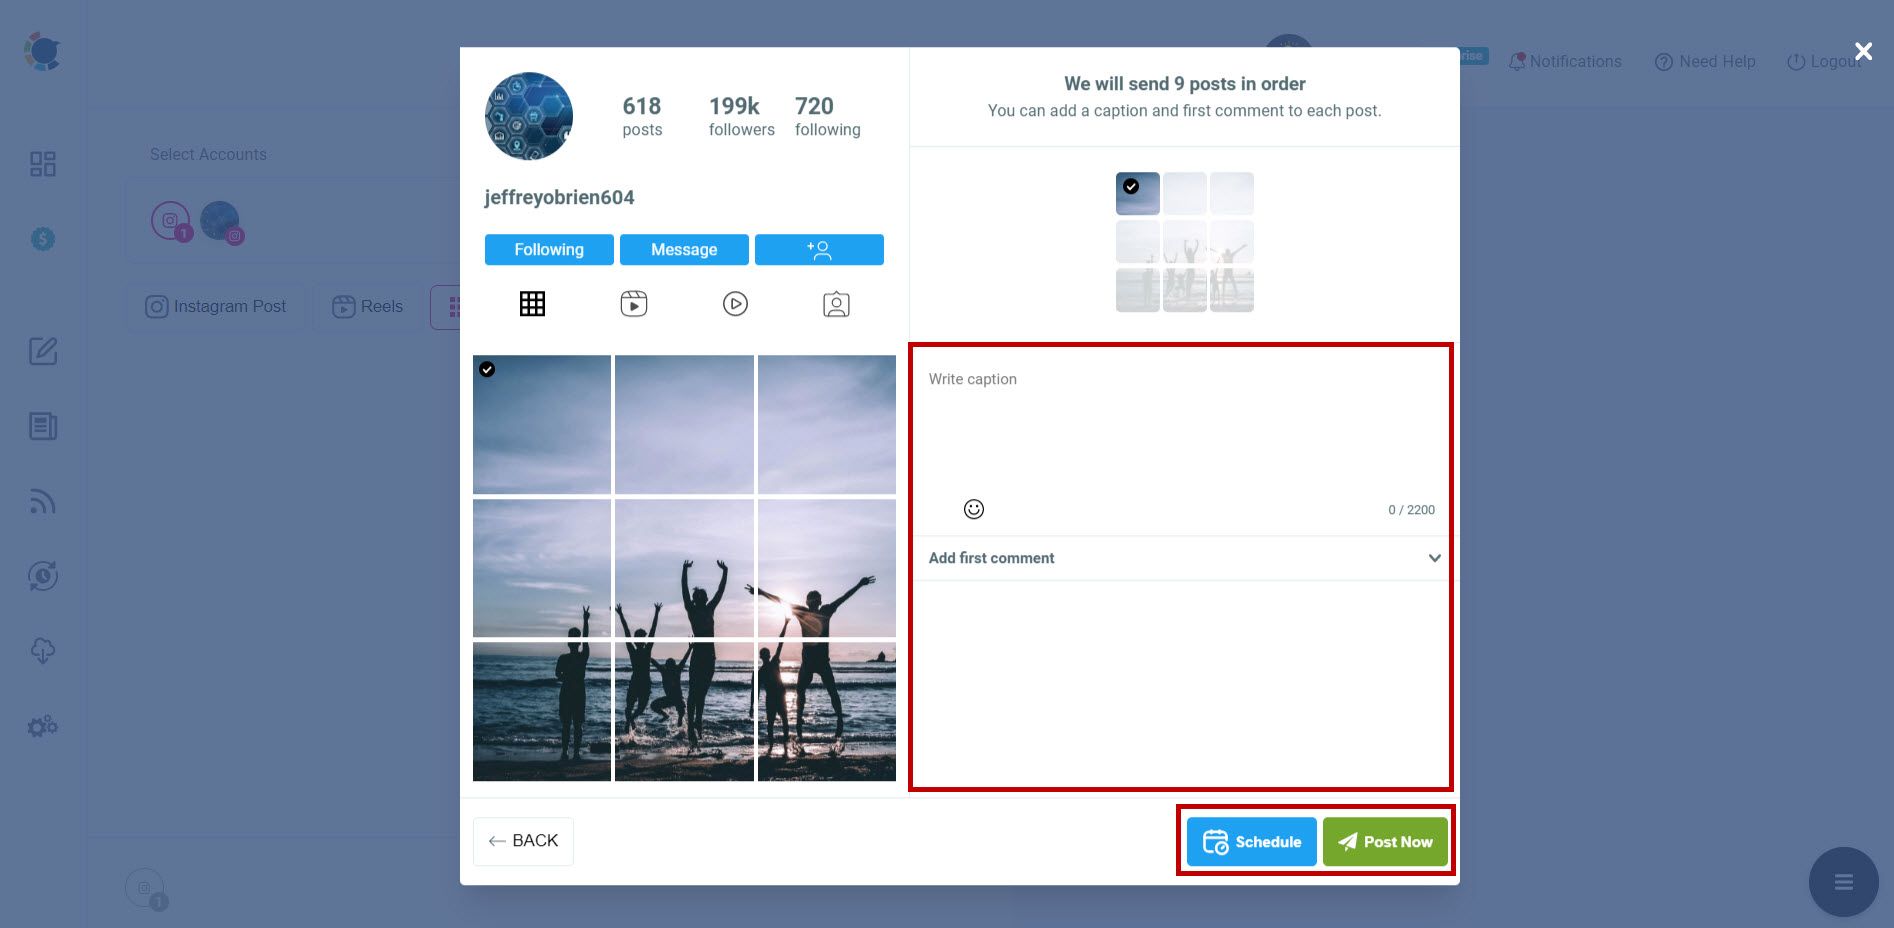 Post, schedule, or add to queue your Instagram posts via Circleboom Publish!